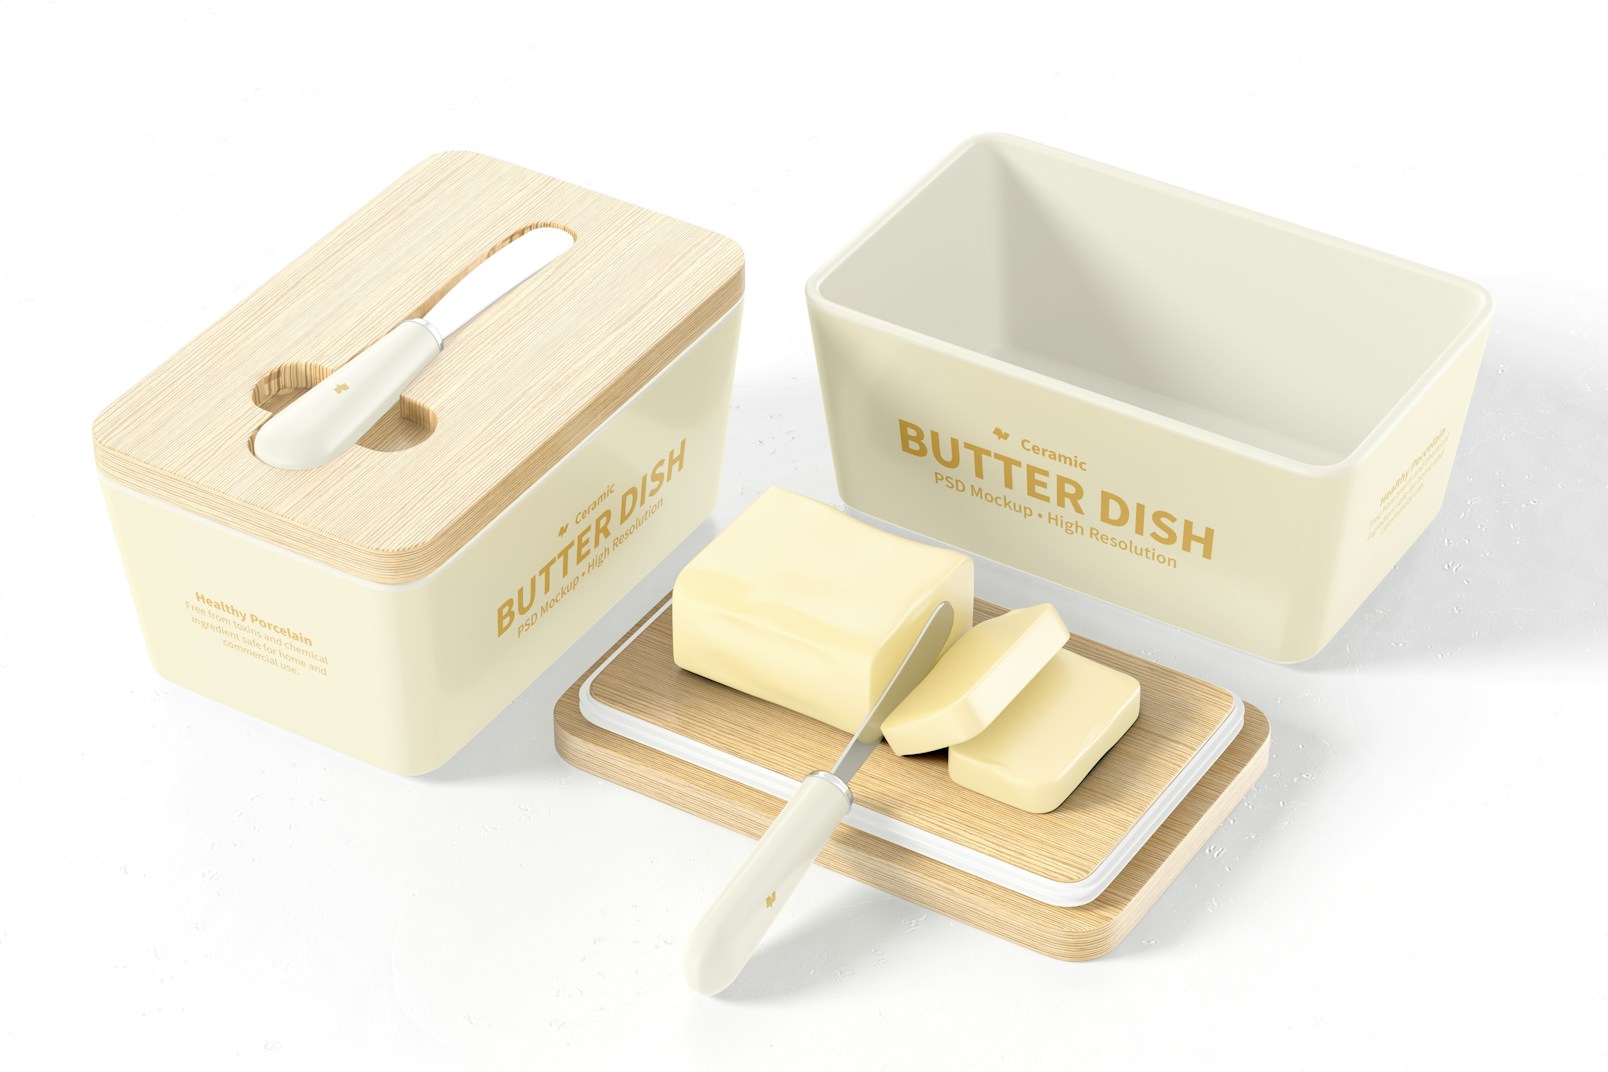 Ceramic Butter Dishes with Bamboo Lid Mockup